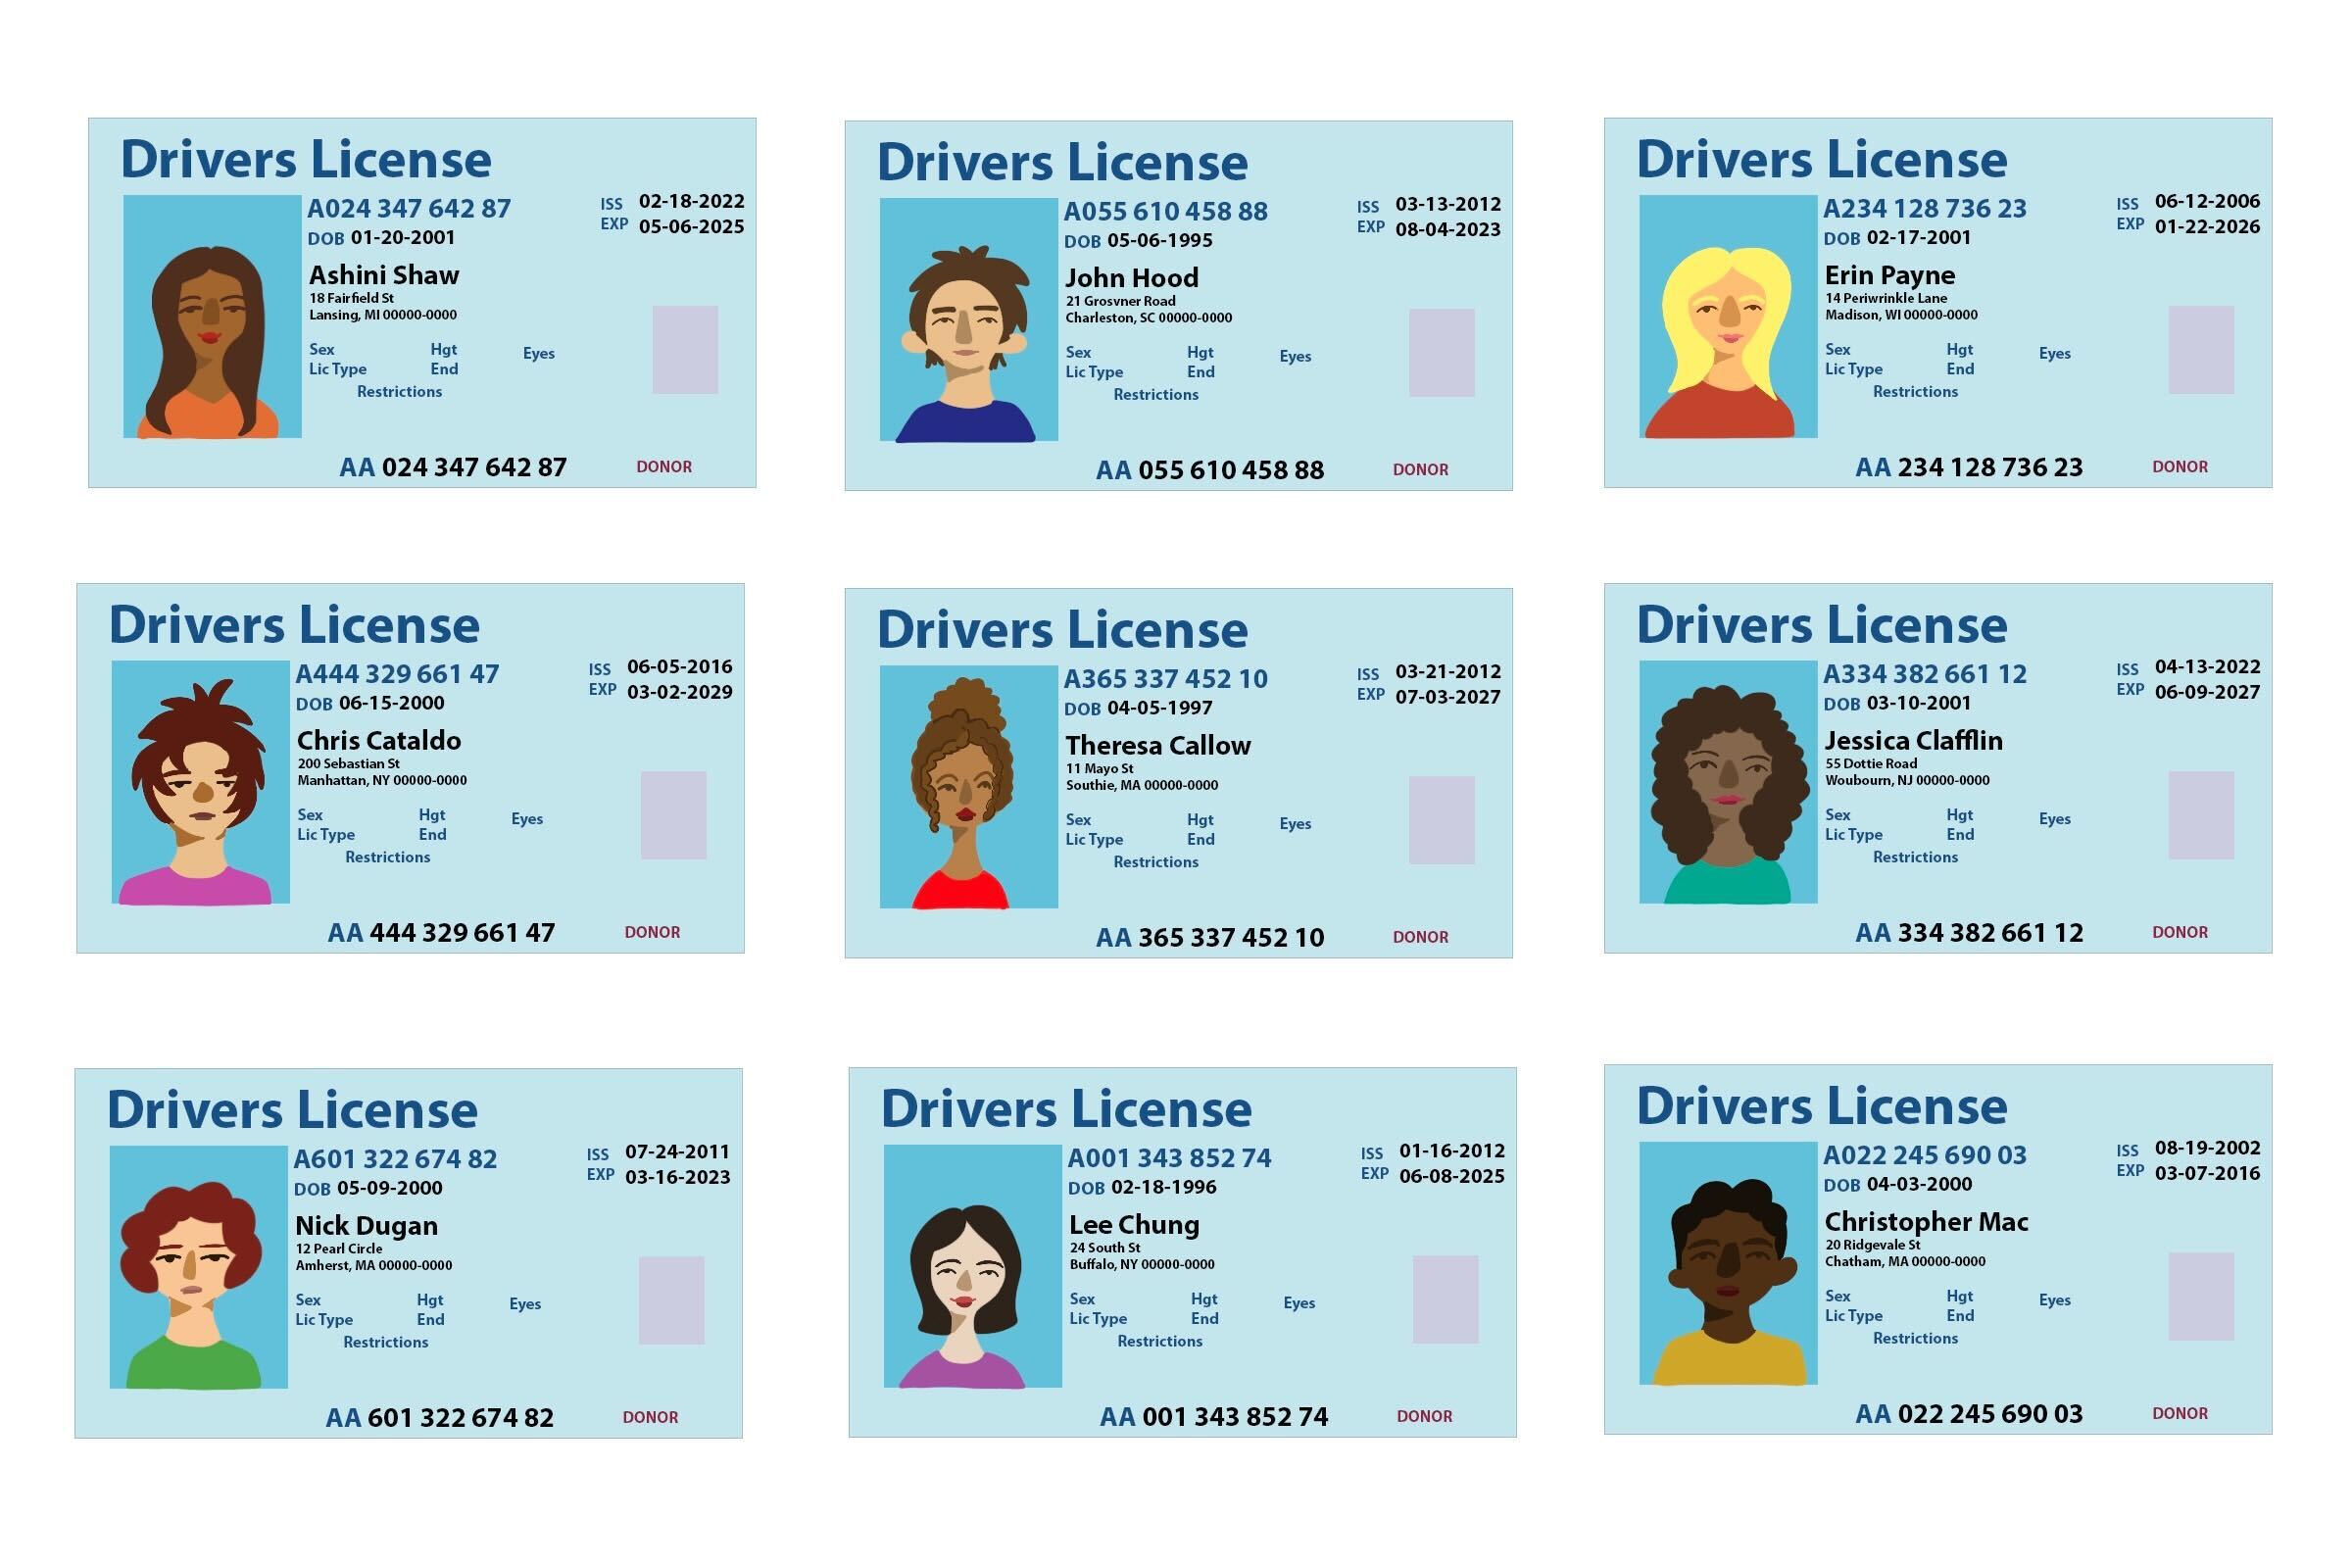 How Much Is A Massachusetts Fake Id